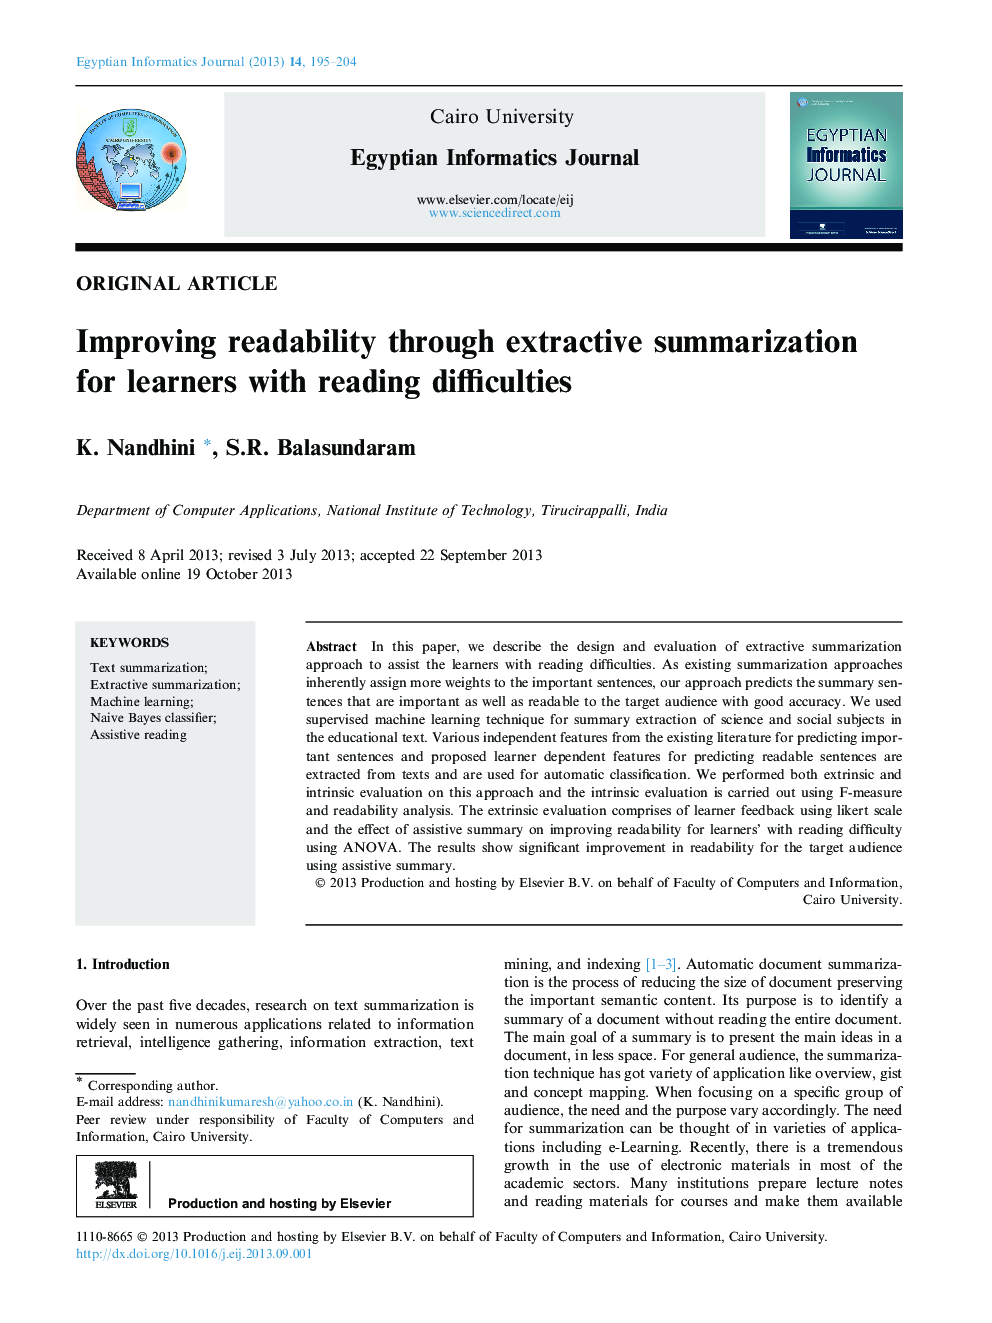 Improving readability through extractive summarization for learners with reading difficulties 